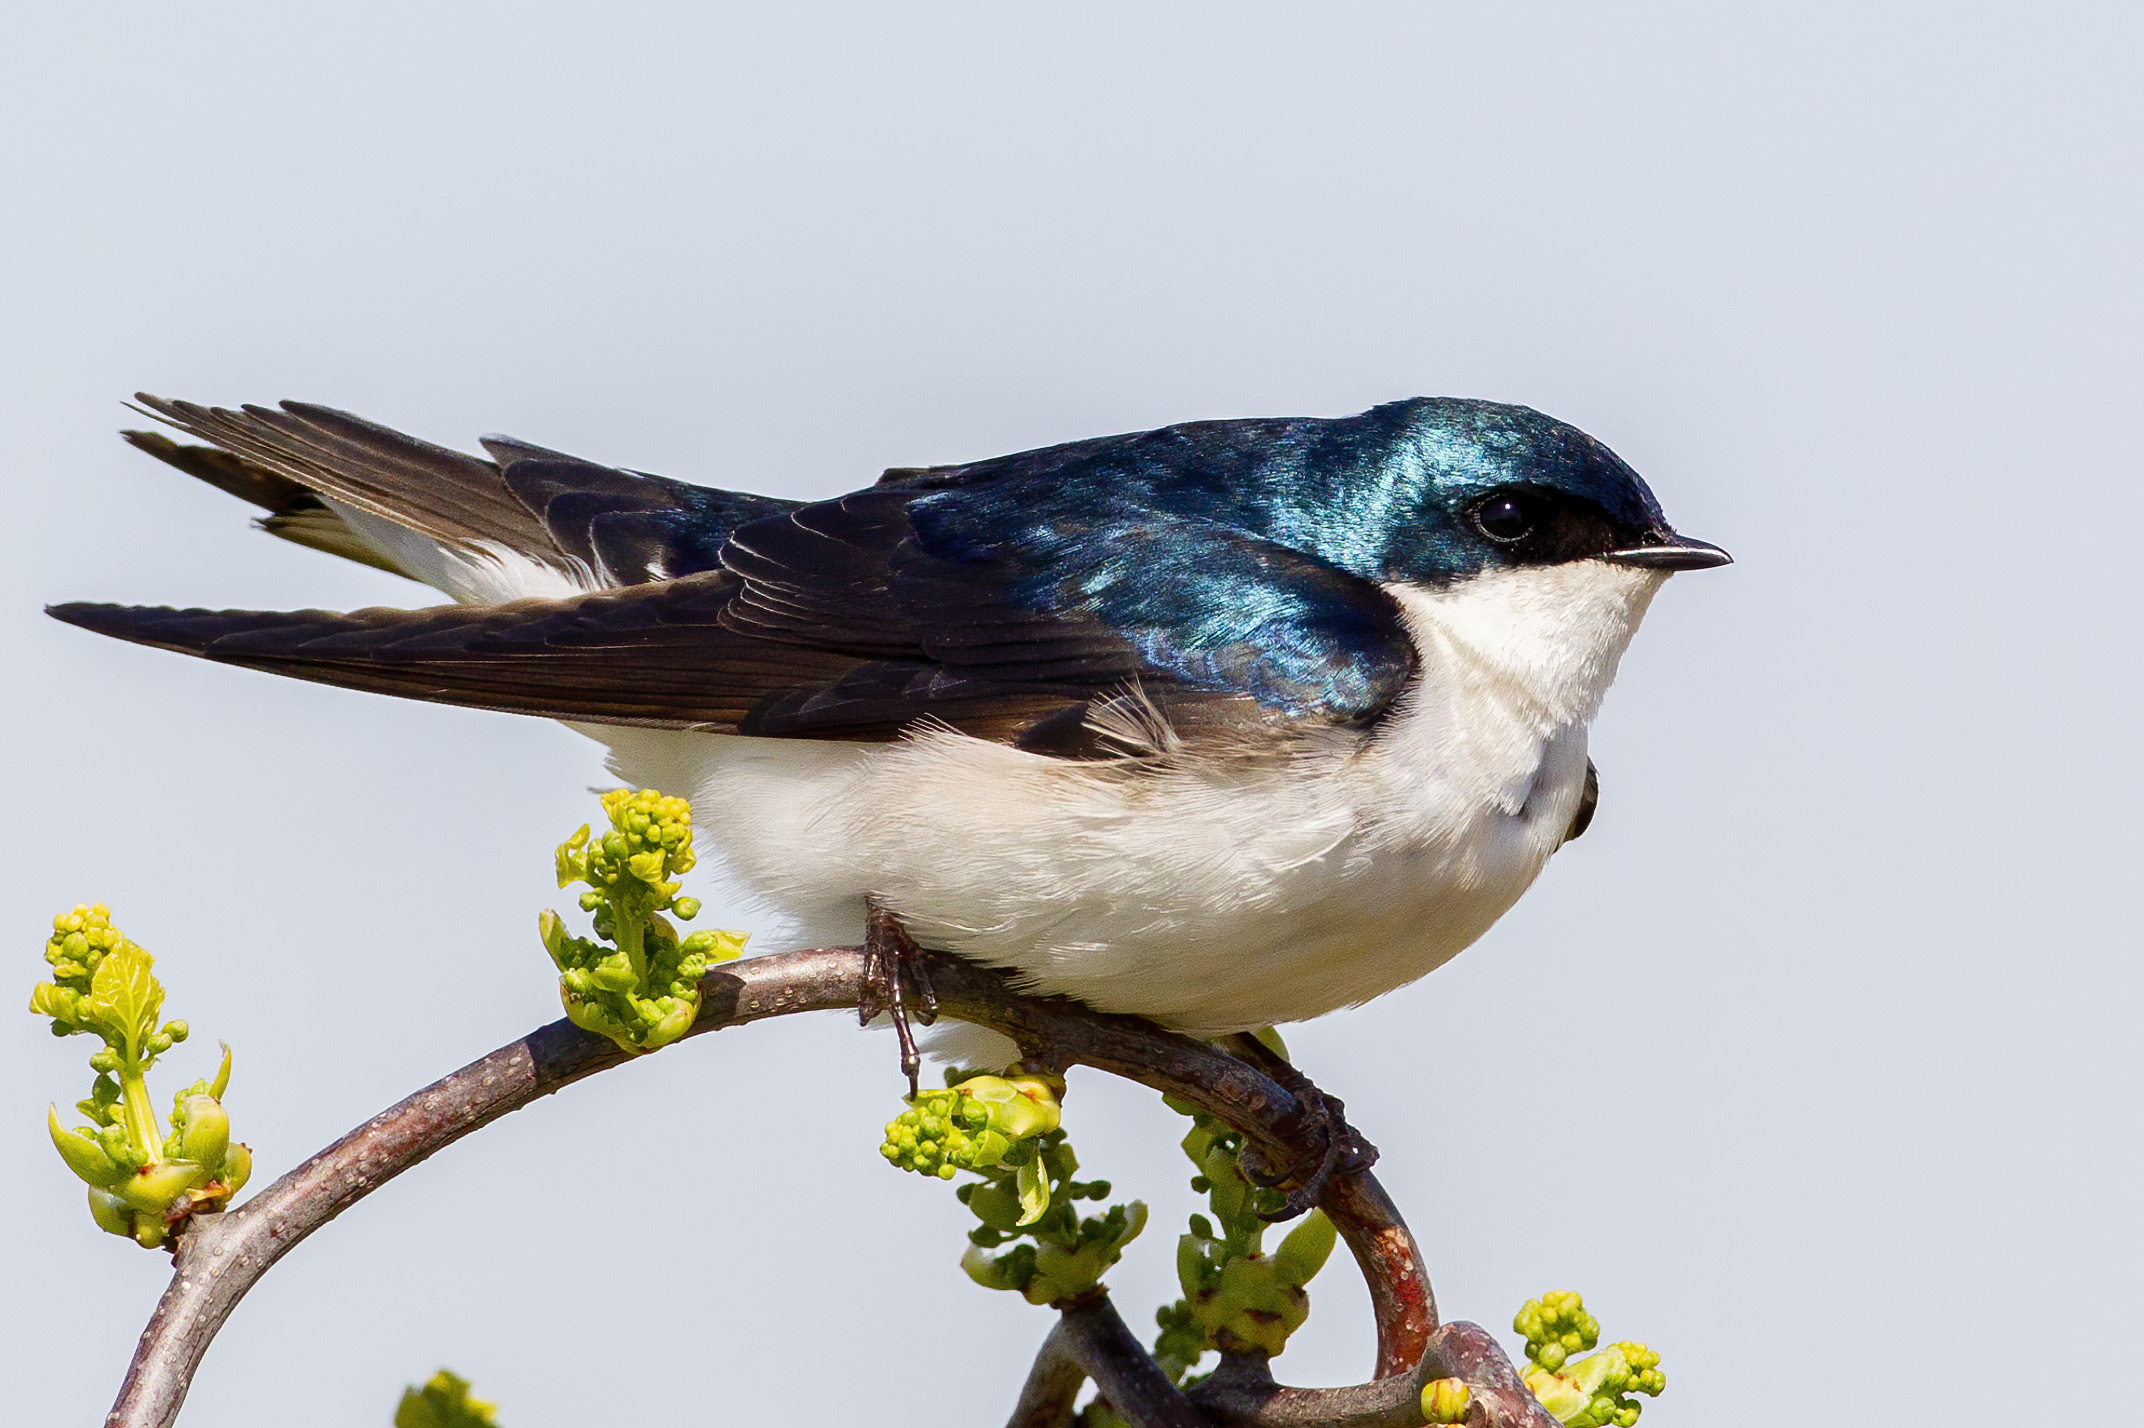 During nesting season, Tree Swallows are often seen around the Hammock Grove and Hills of Governors Island. Photo: Lloyd Spitalnik